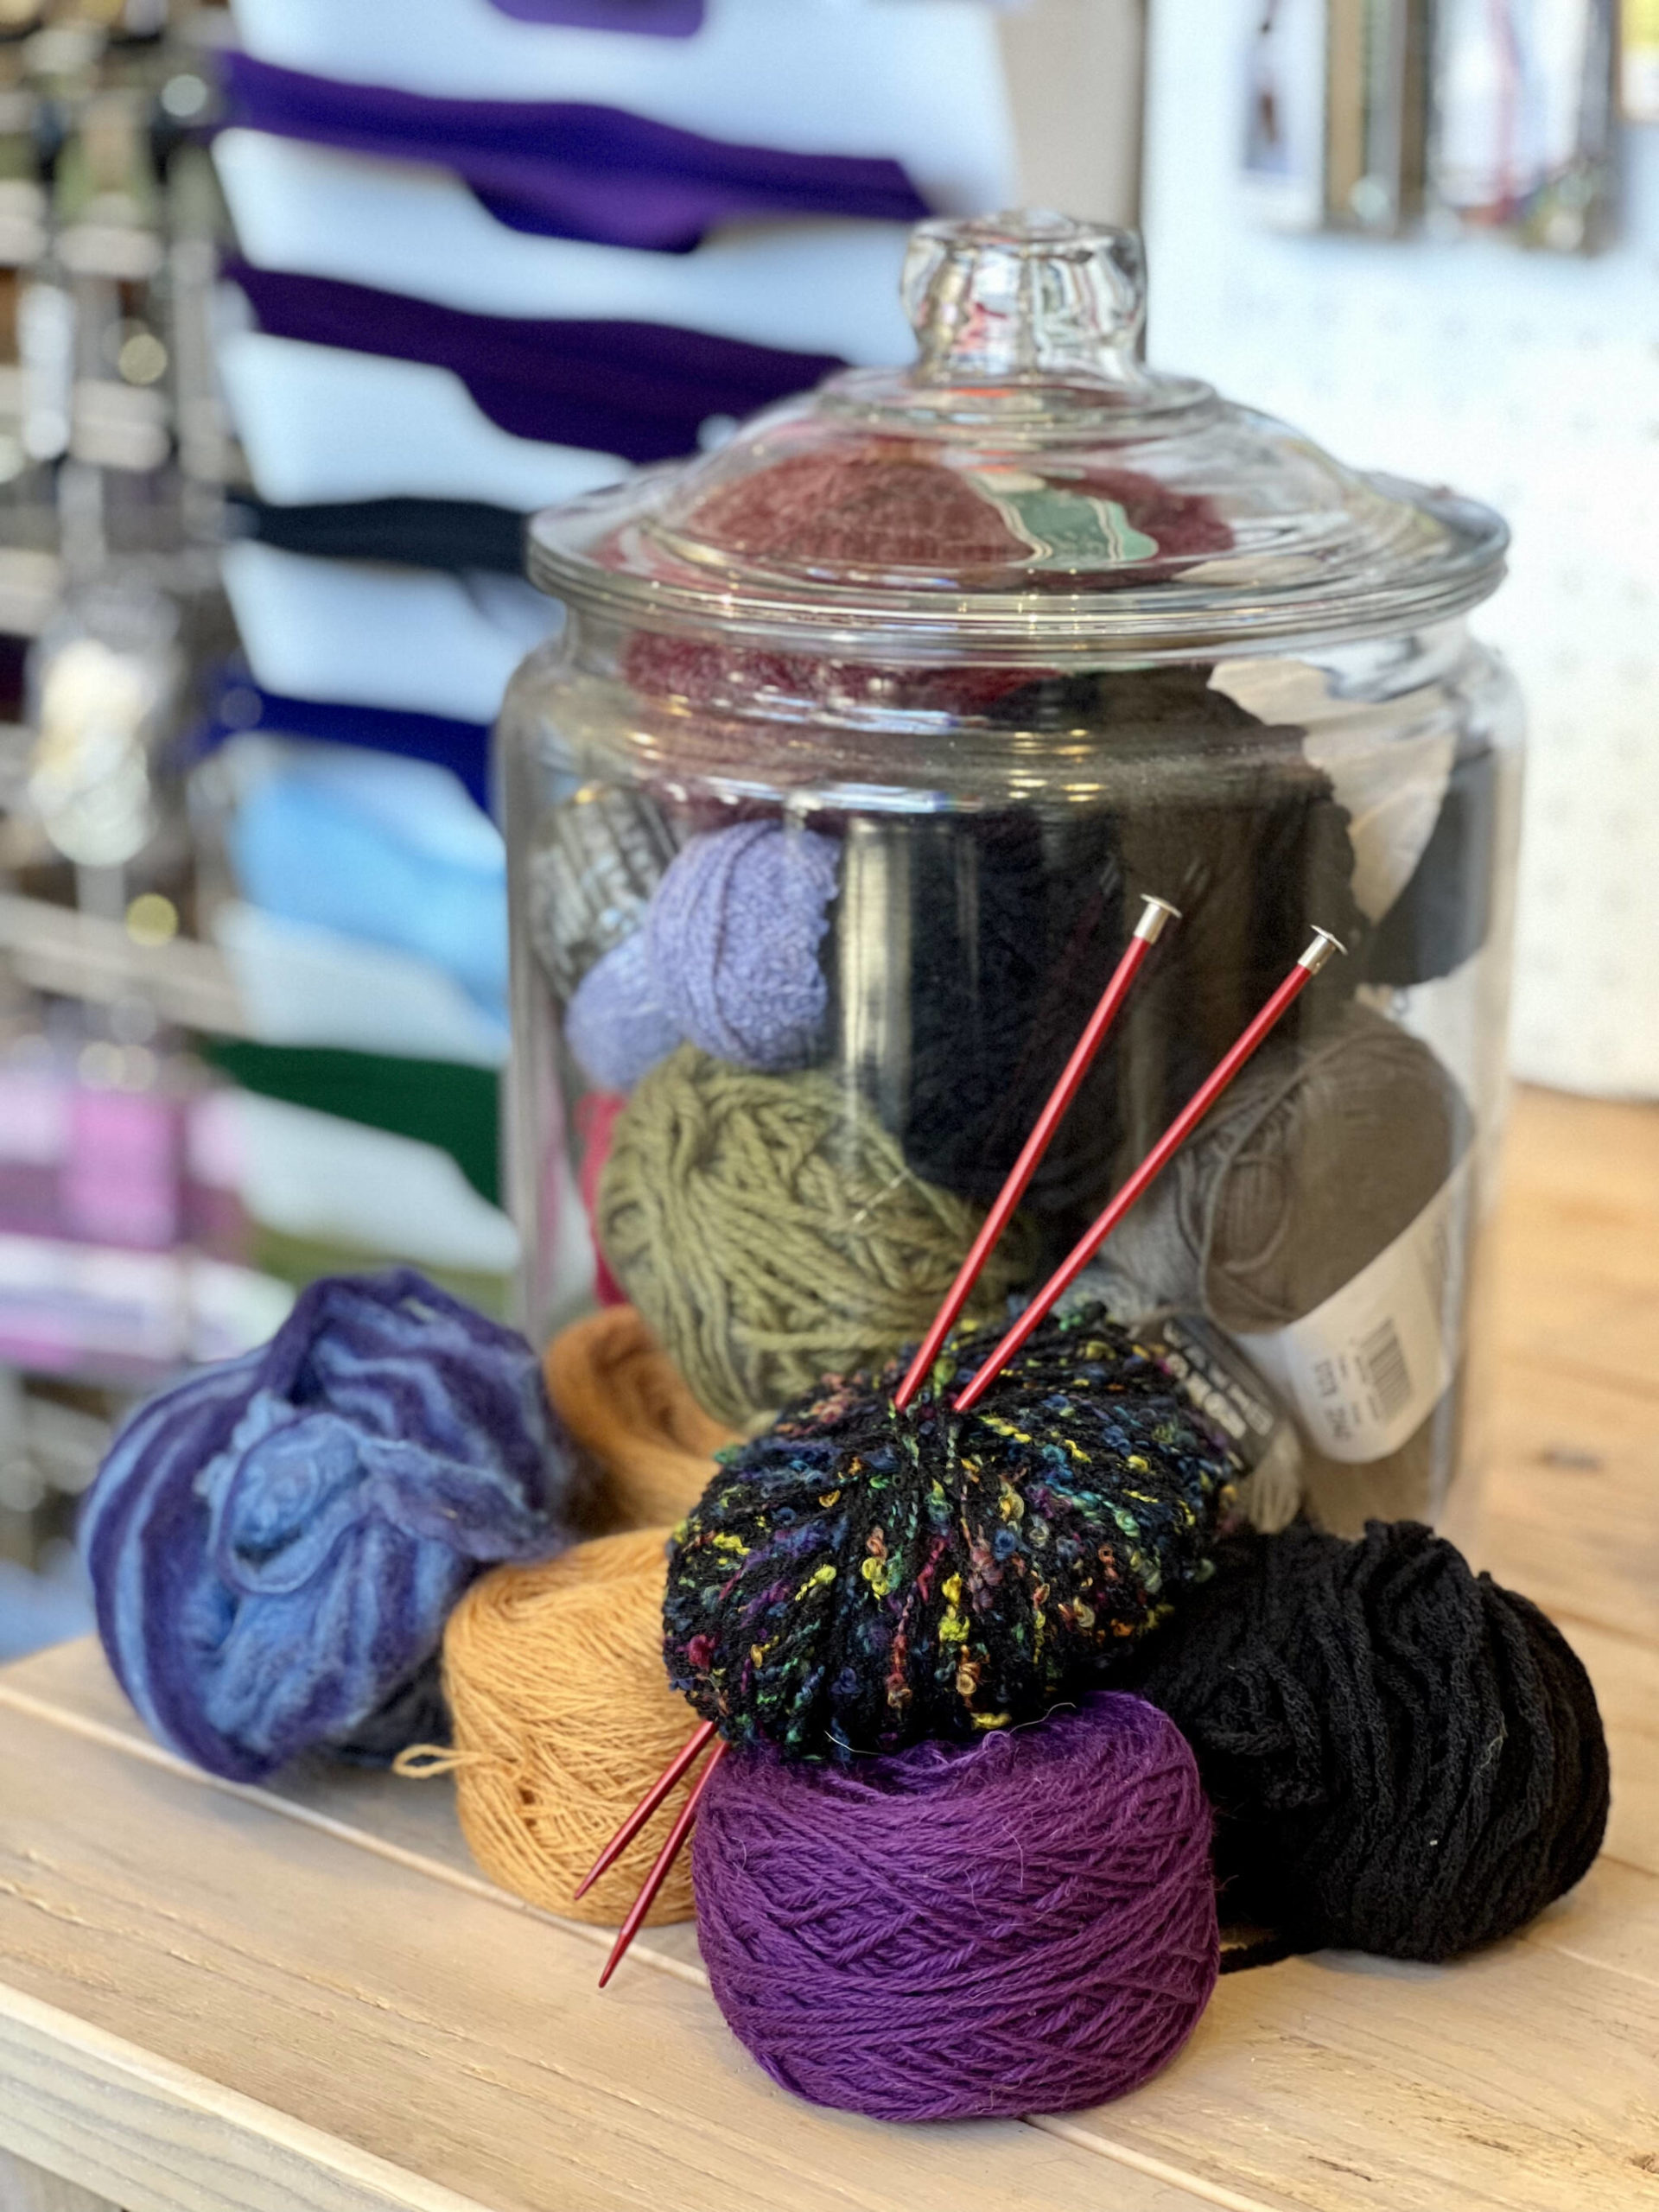 A small portion of the yarn balls rescued from the landfill.